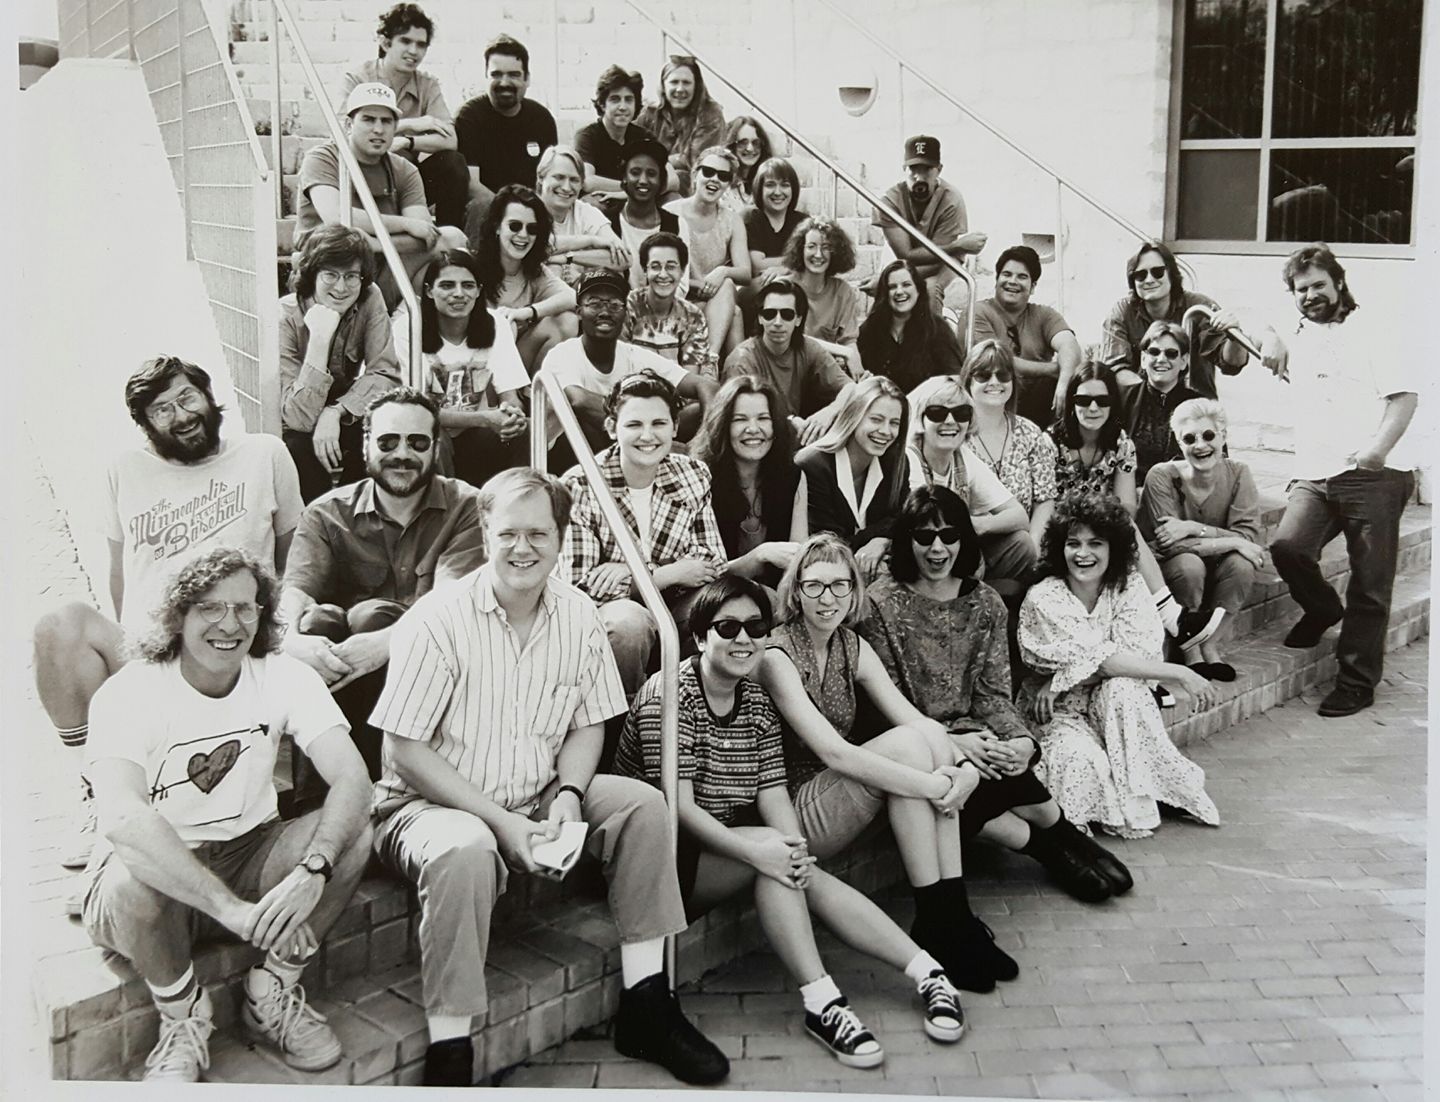 SXSW Staff in the early 90’s.